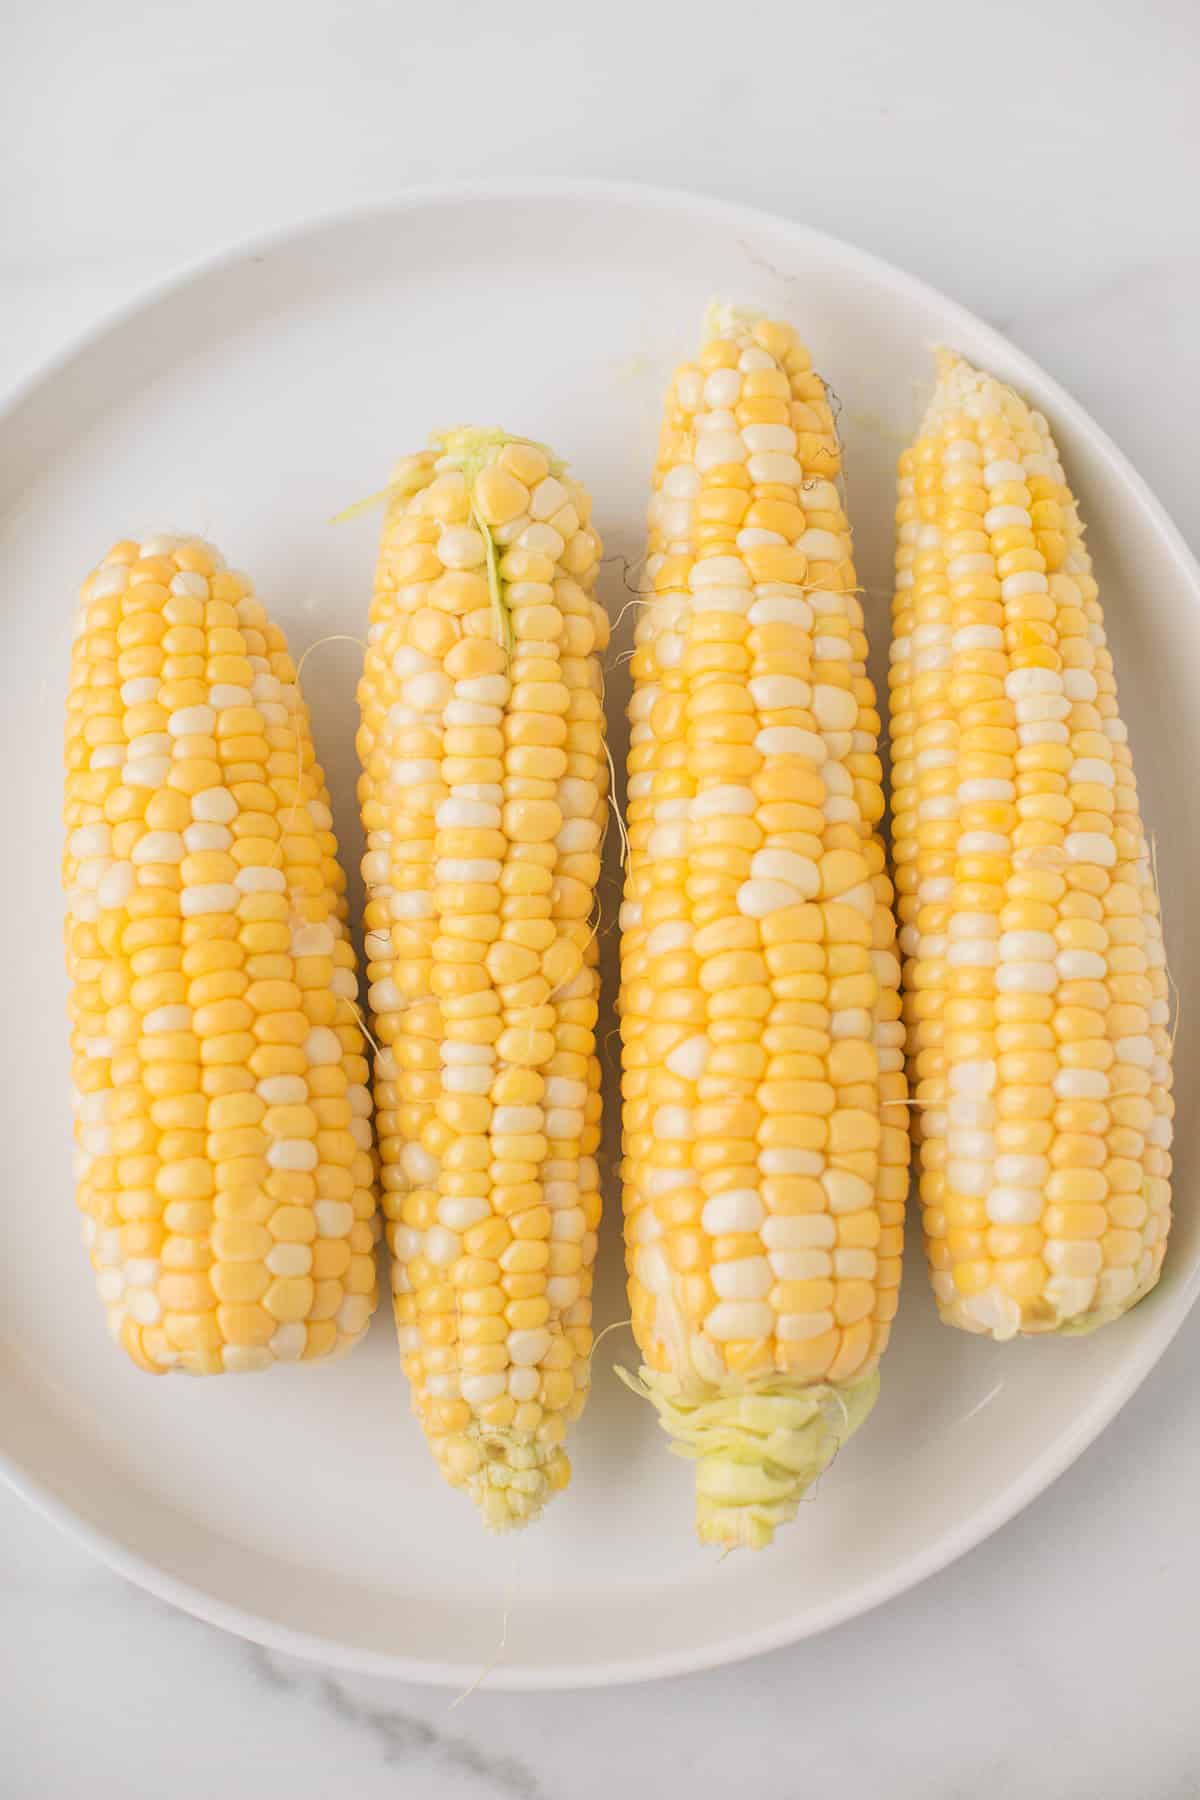 four pieces of corn on a plate with the corn husks removed